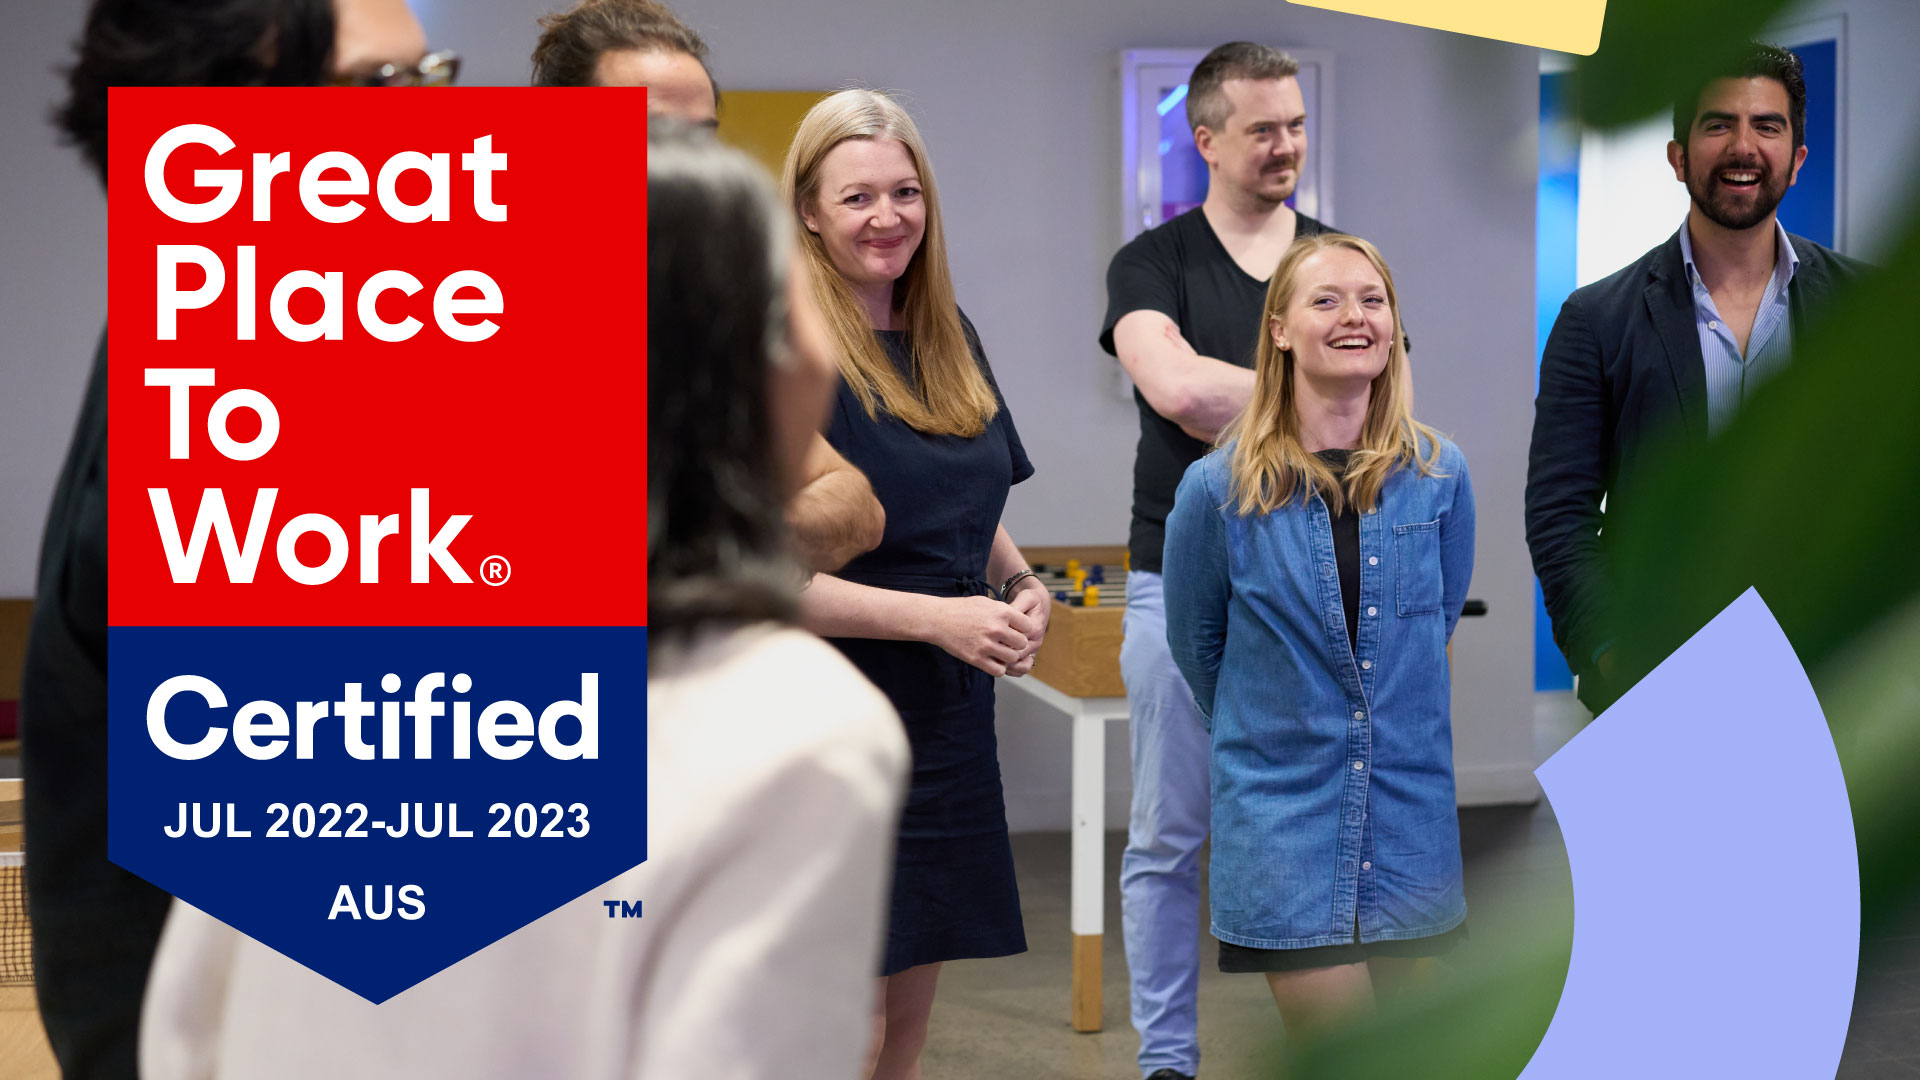 Image of a group of Sitback employees standing together and laughing. Overlayed is a badge saying that Sitback is Great Place To Work certified from July 2022 to July 2023.